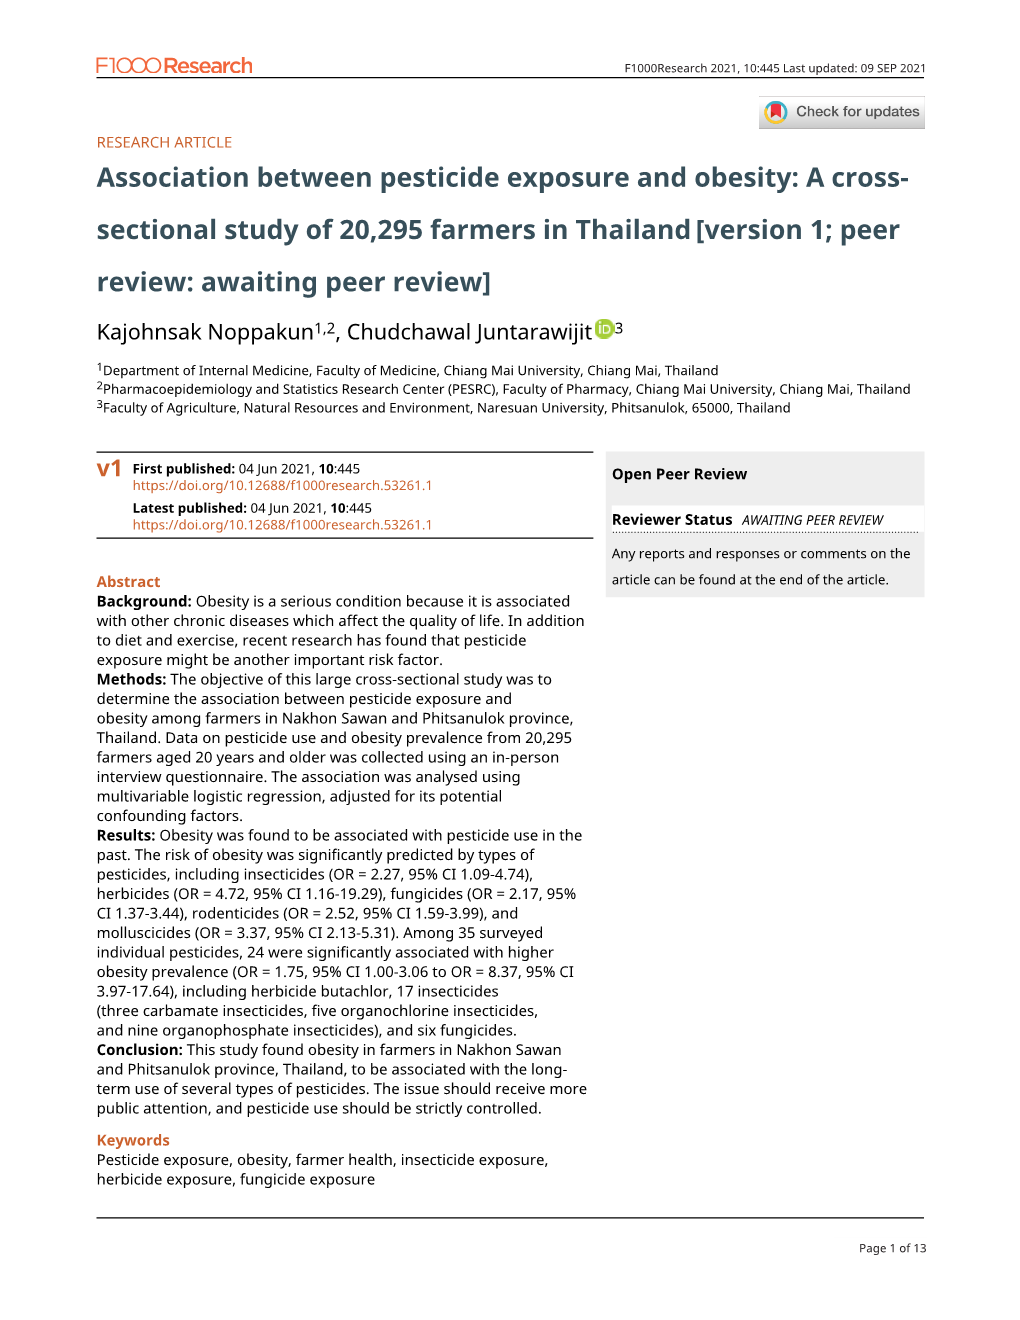 Association Between Pesticide Exposure and Obesity: a Cross- Sectional Study of 20,295 Farmers in Thailand [Version 1; Peer Review: Awaiting Peer Review]